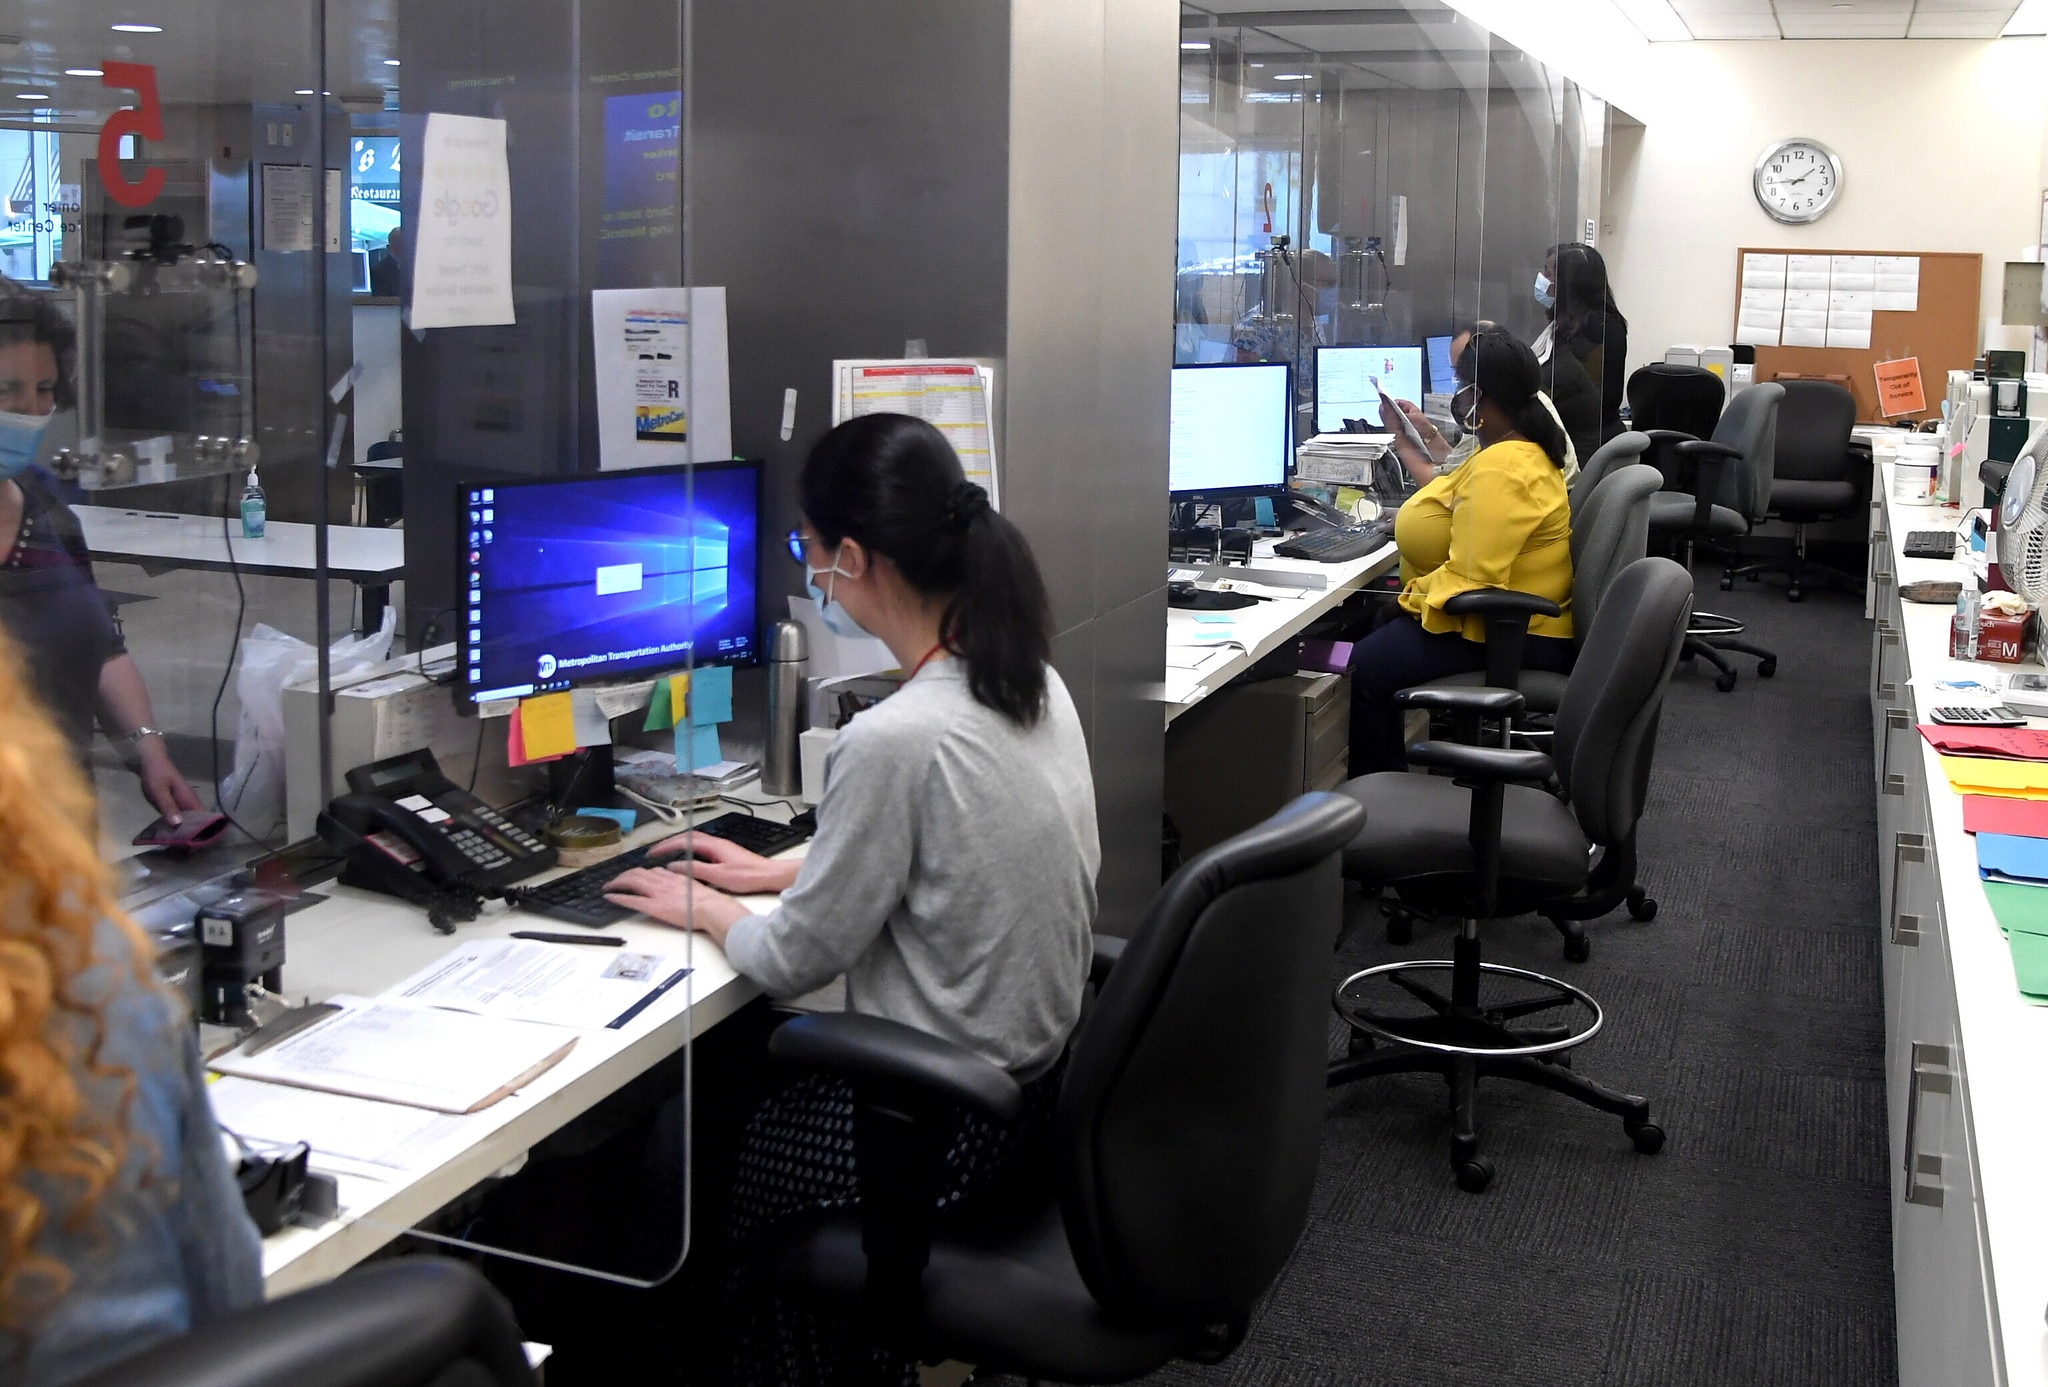 New York City Transit Customer Service Center Opens by Appointment Only with COVID Protections in Place